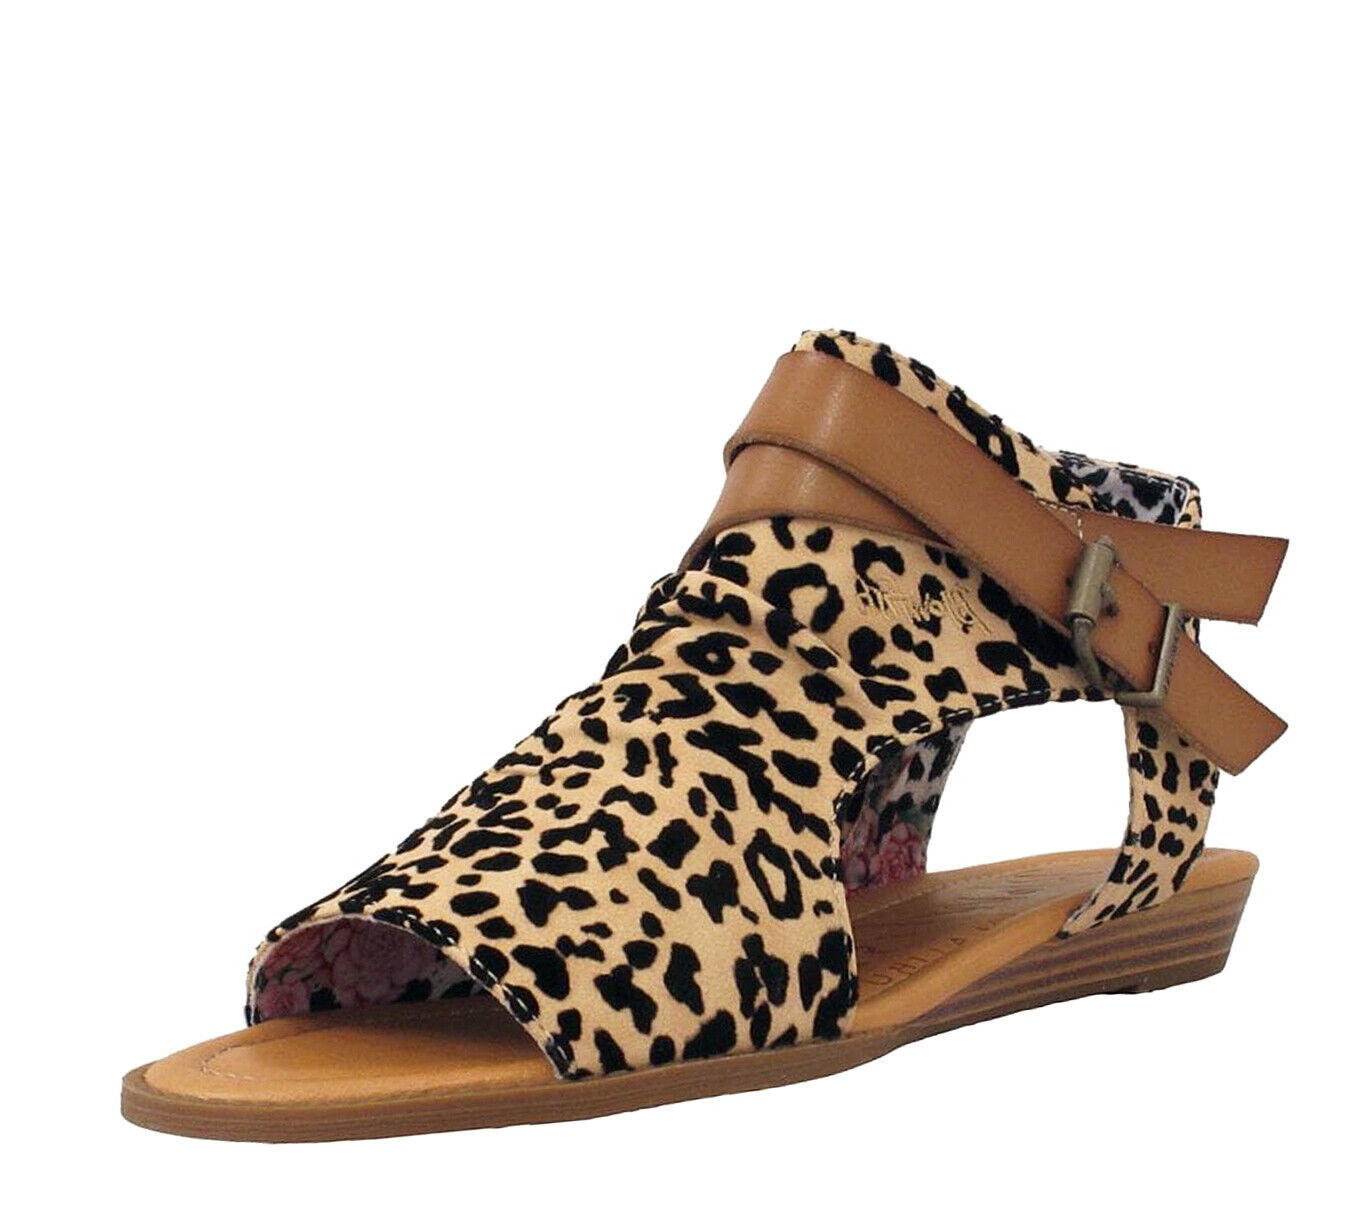 rejection To separate while Blowfish NEW Balla leopard sand open toe low wedge fashion sandals shoes sz  3-8 | eBay